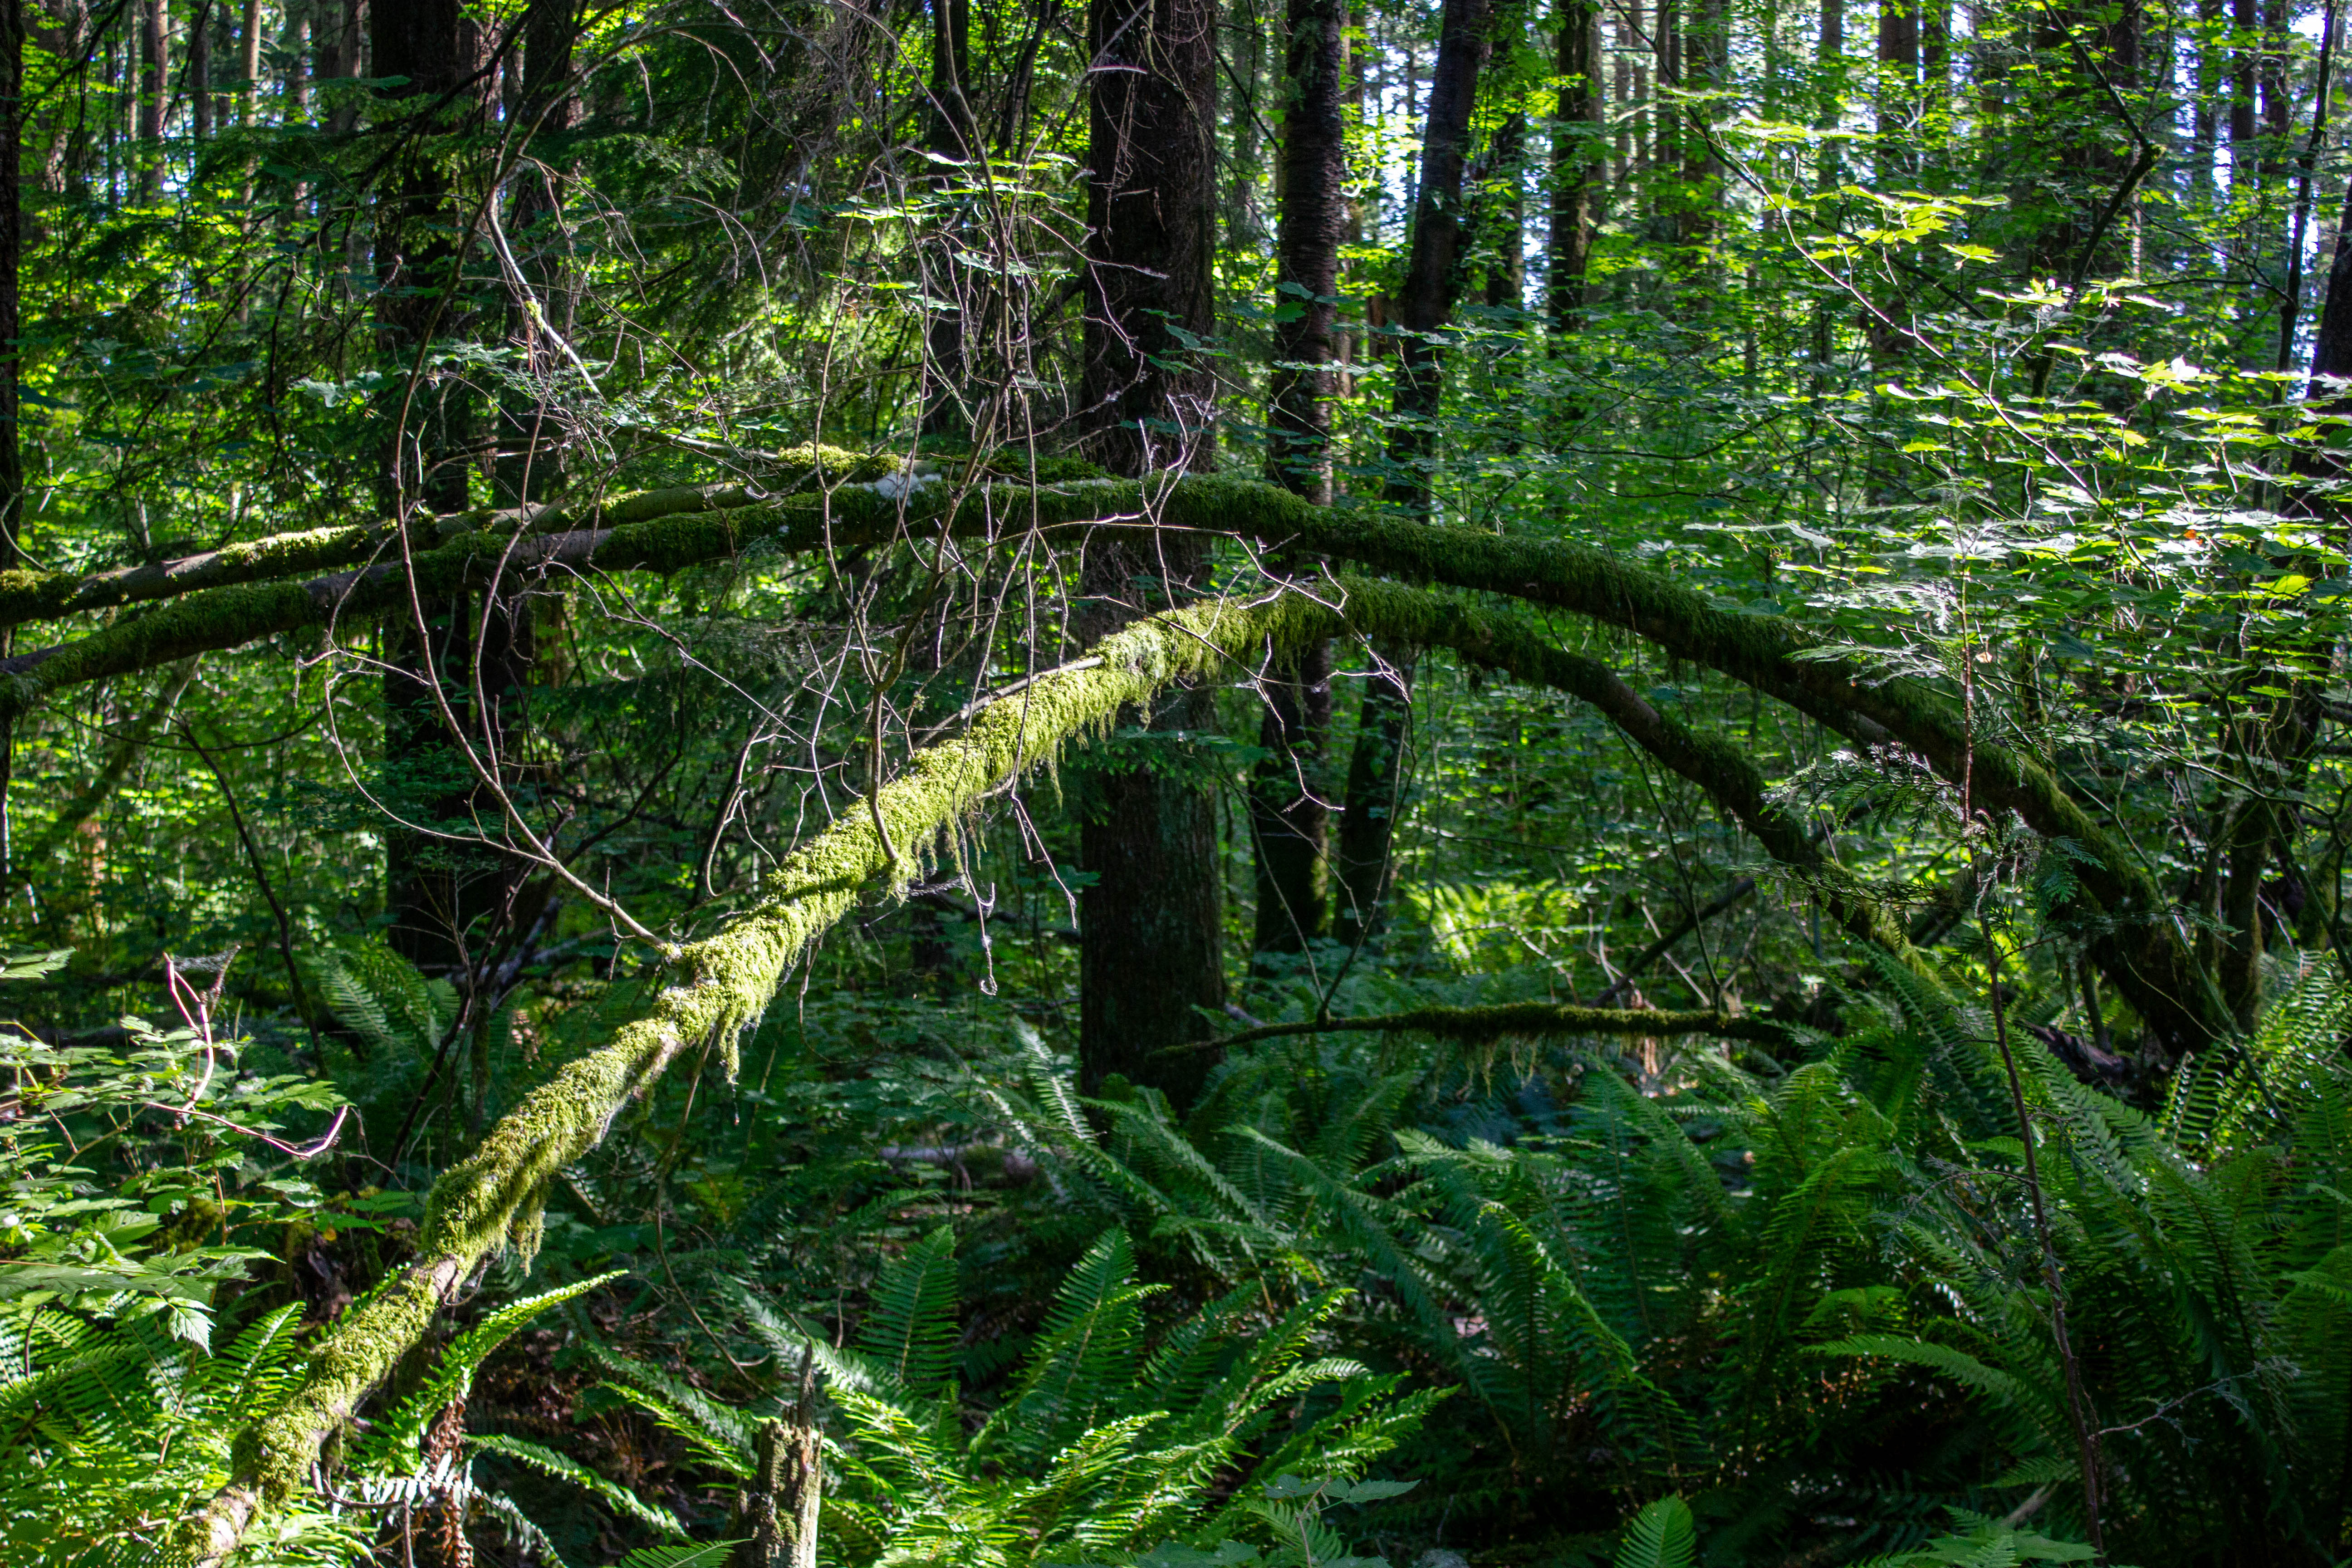 A picture of a fallen tree with moss growing on it and the sunlight beaming in from above, located along the Quibble Creek Trail in Green Timbers Urban Forrest in Surrey.